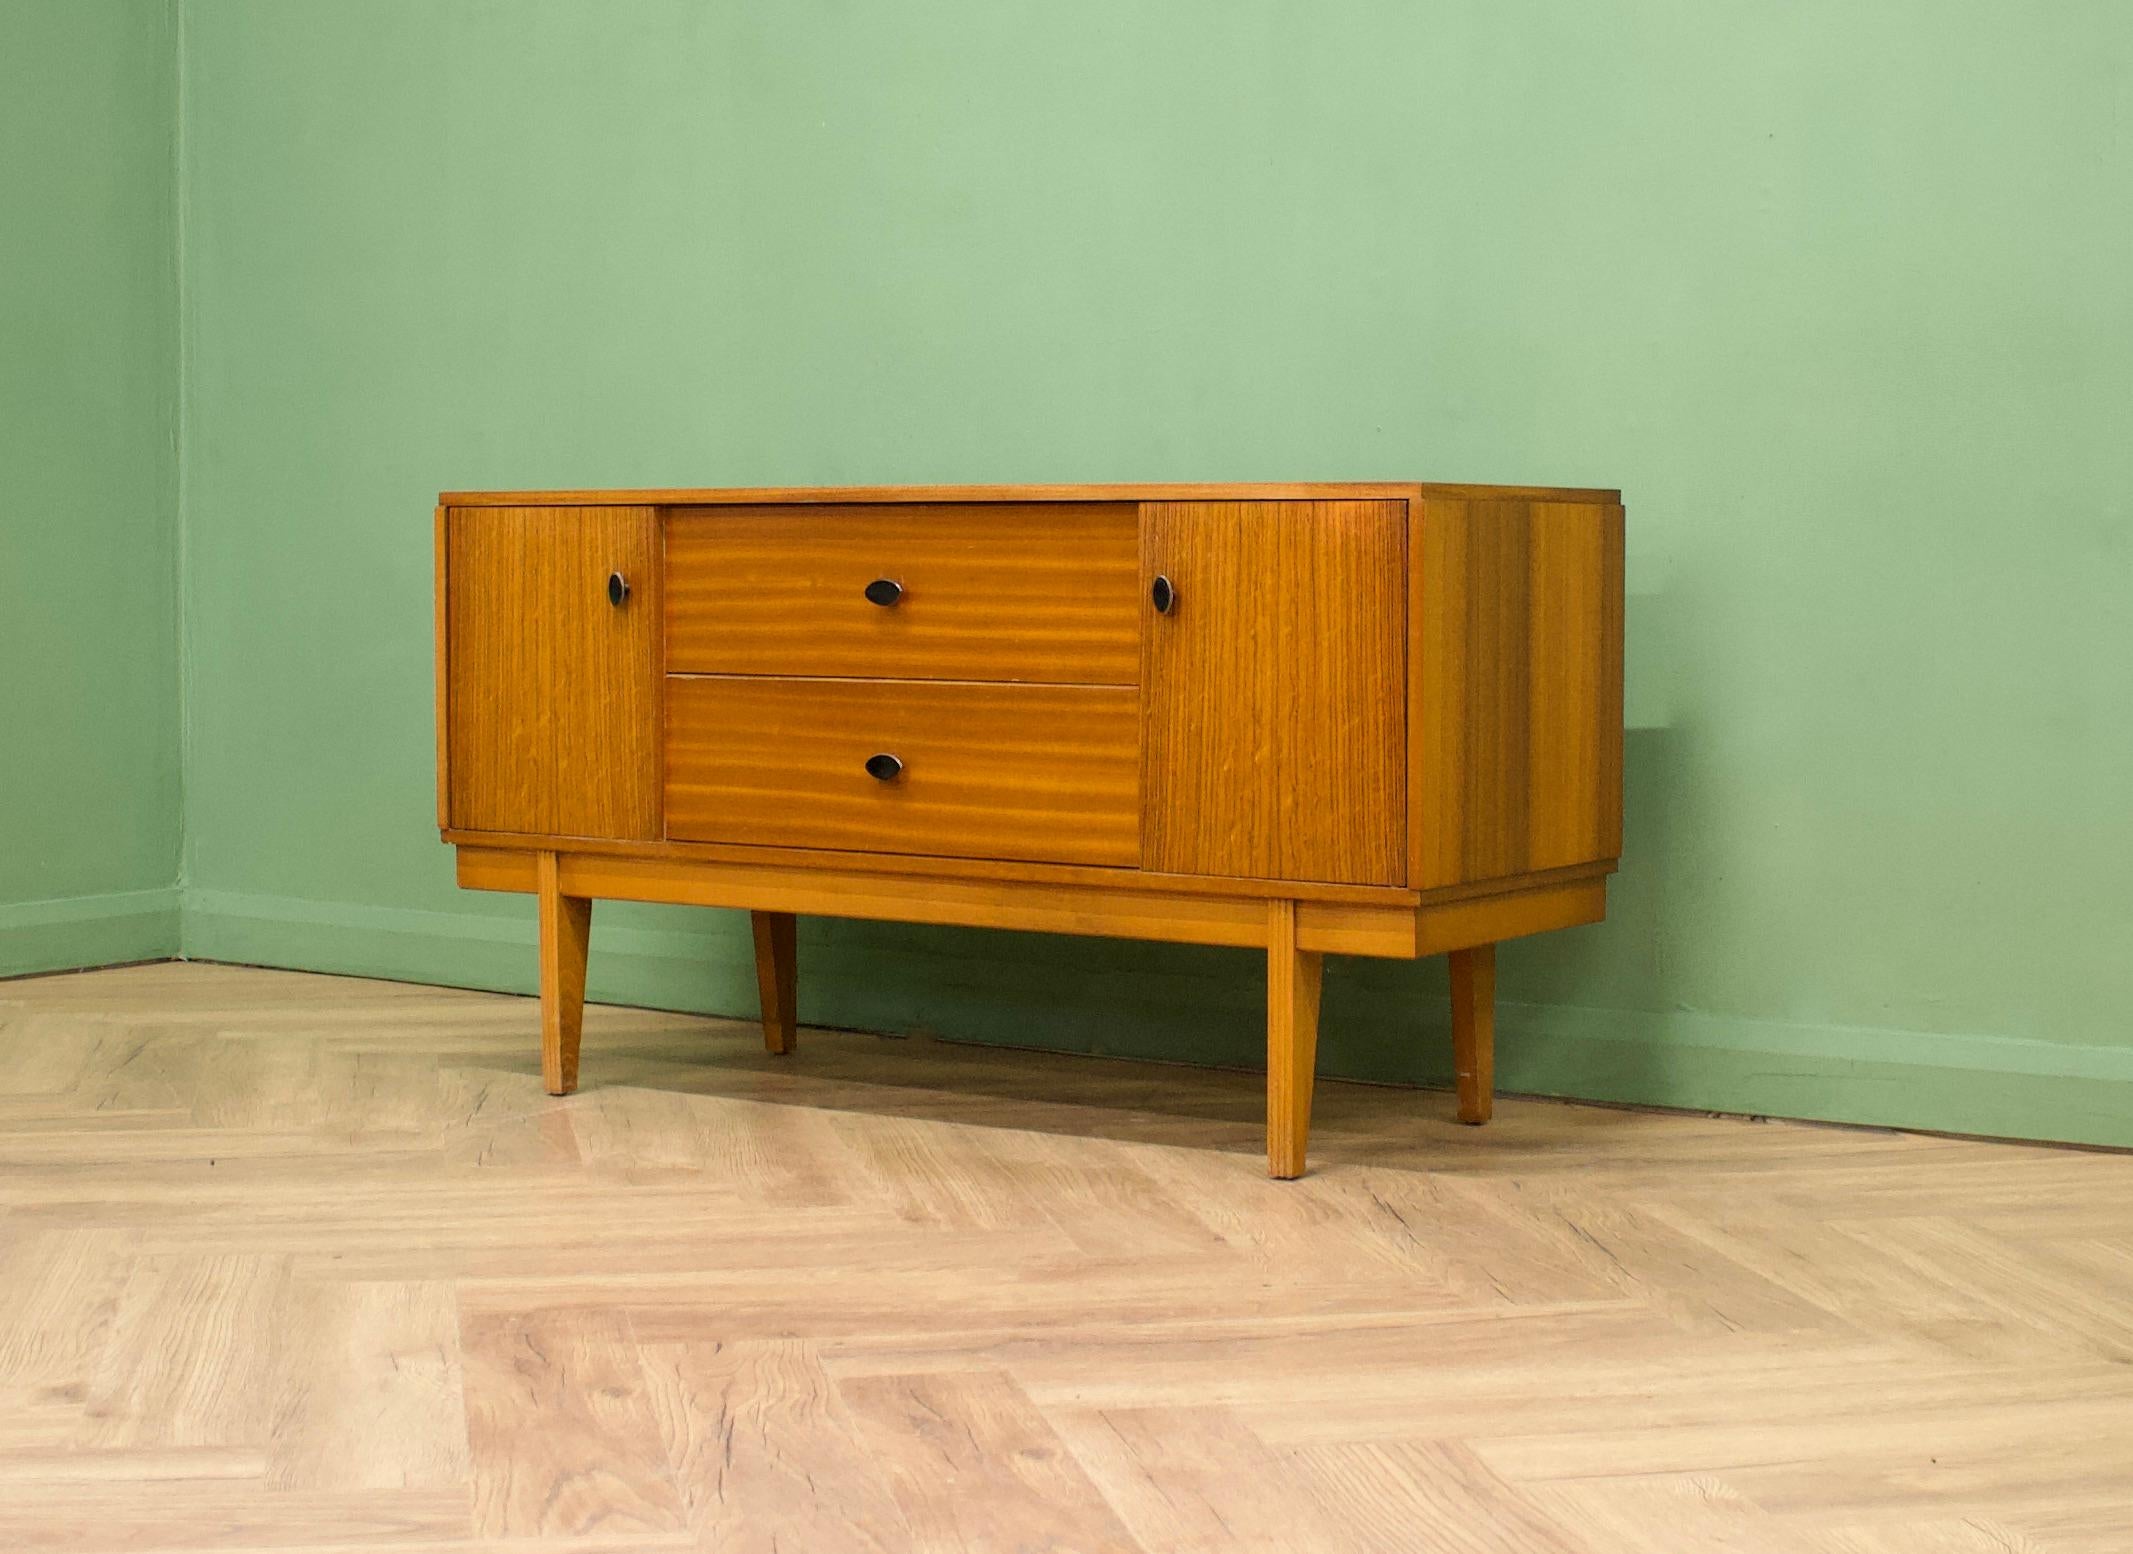 A teak & walnut compact sideboard from Austinsuite London- Circa 1960s

Designed by Frank Guille

It features two drawers and two cupboards